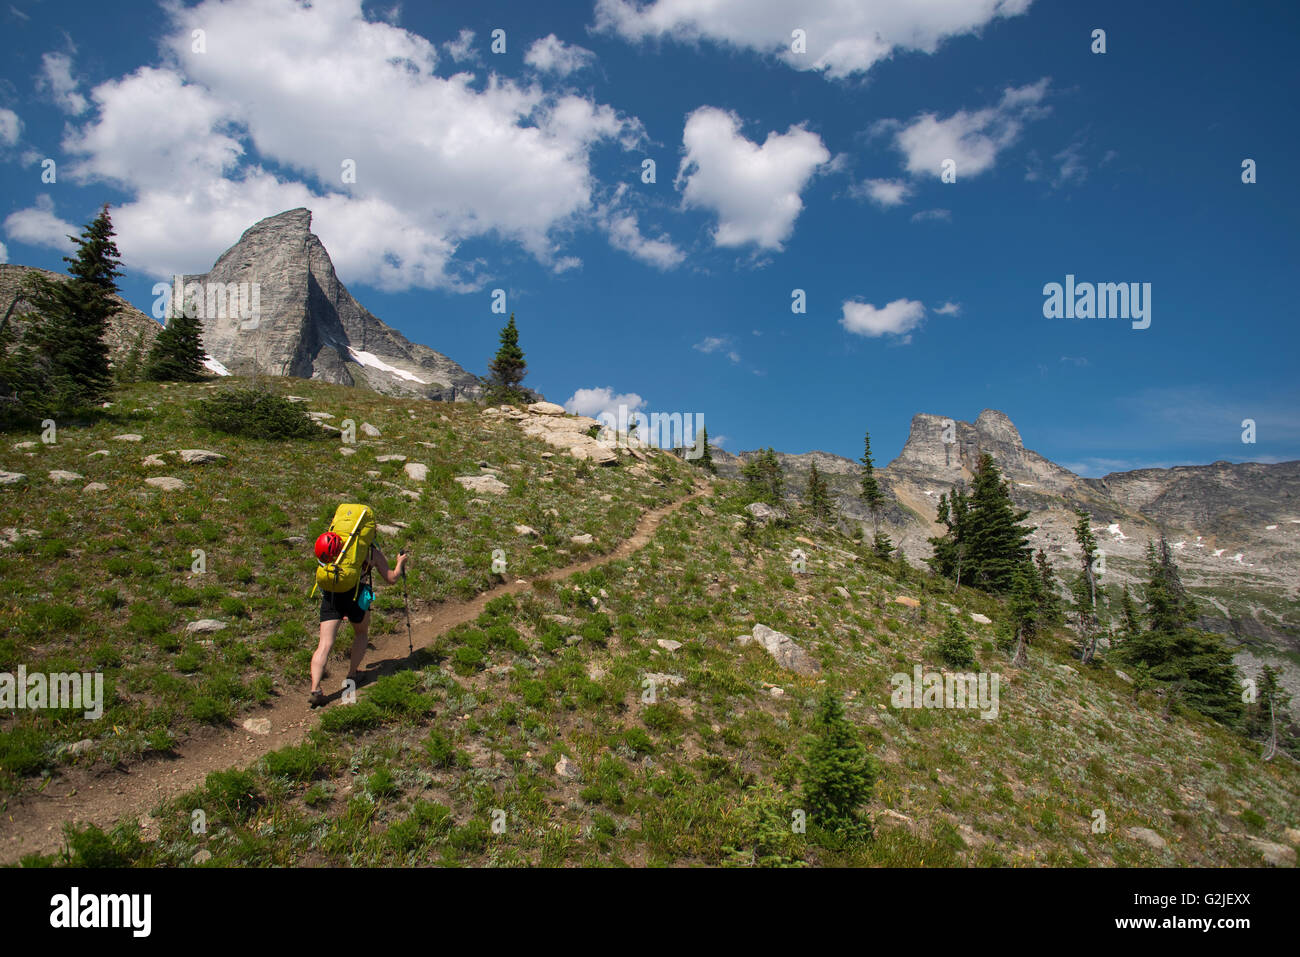 Hiker approaching Mount Gimli, Selkirk Mountains. Valhalla Provincial Park, British Columbia, Canada Stock Photo